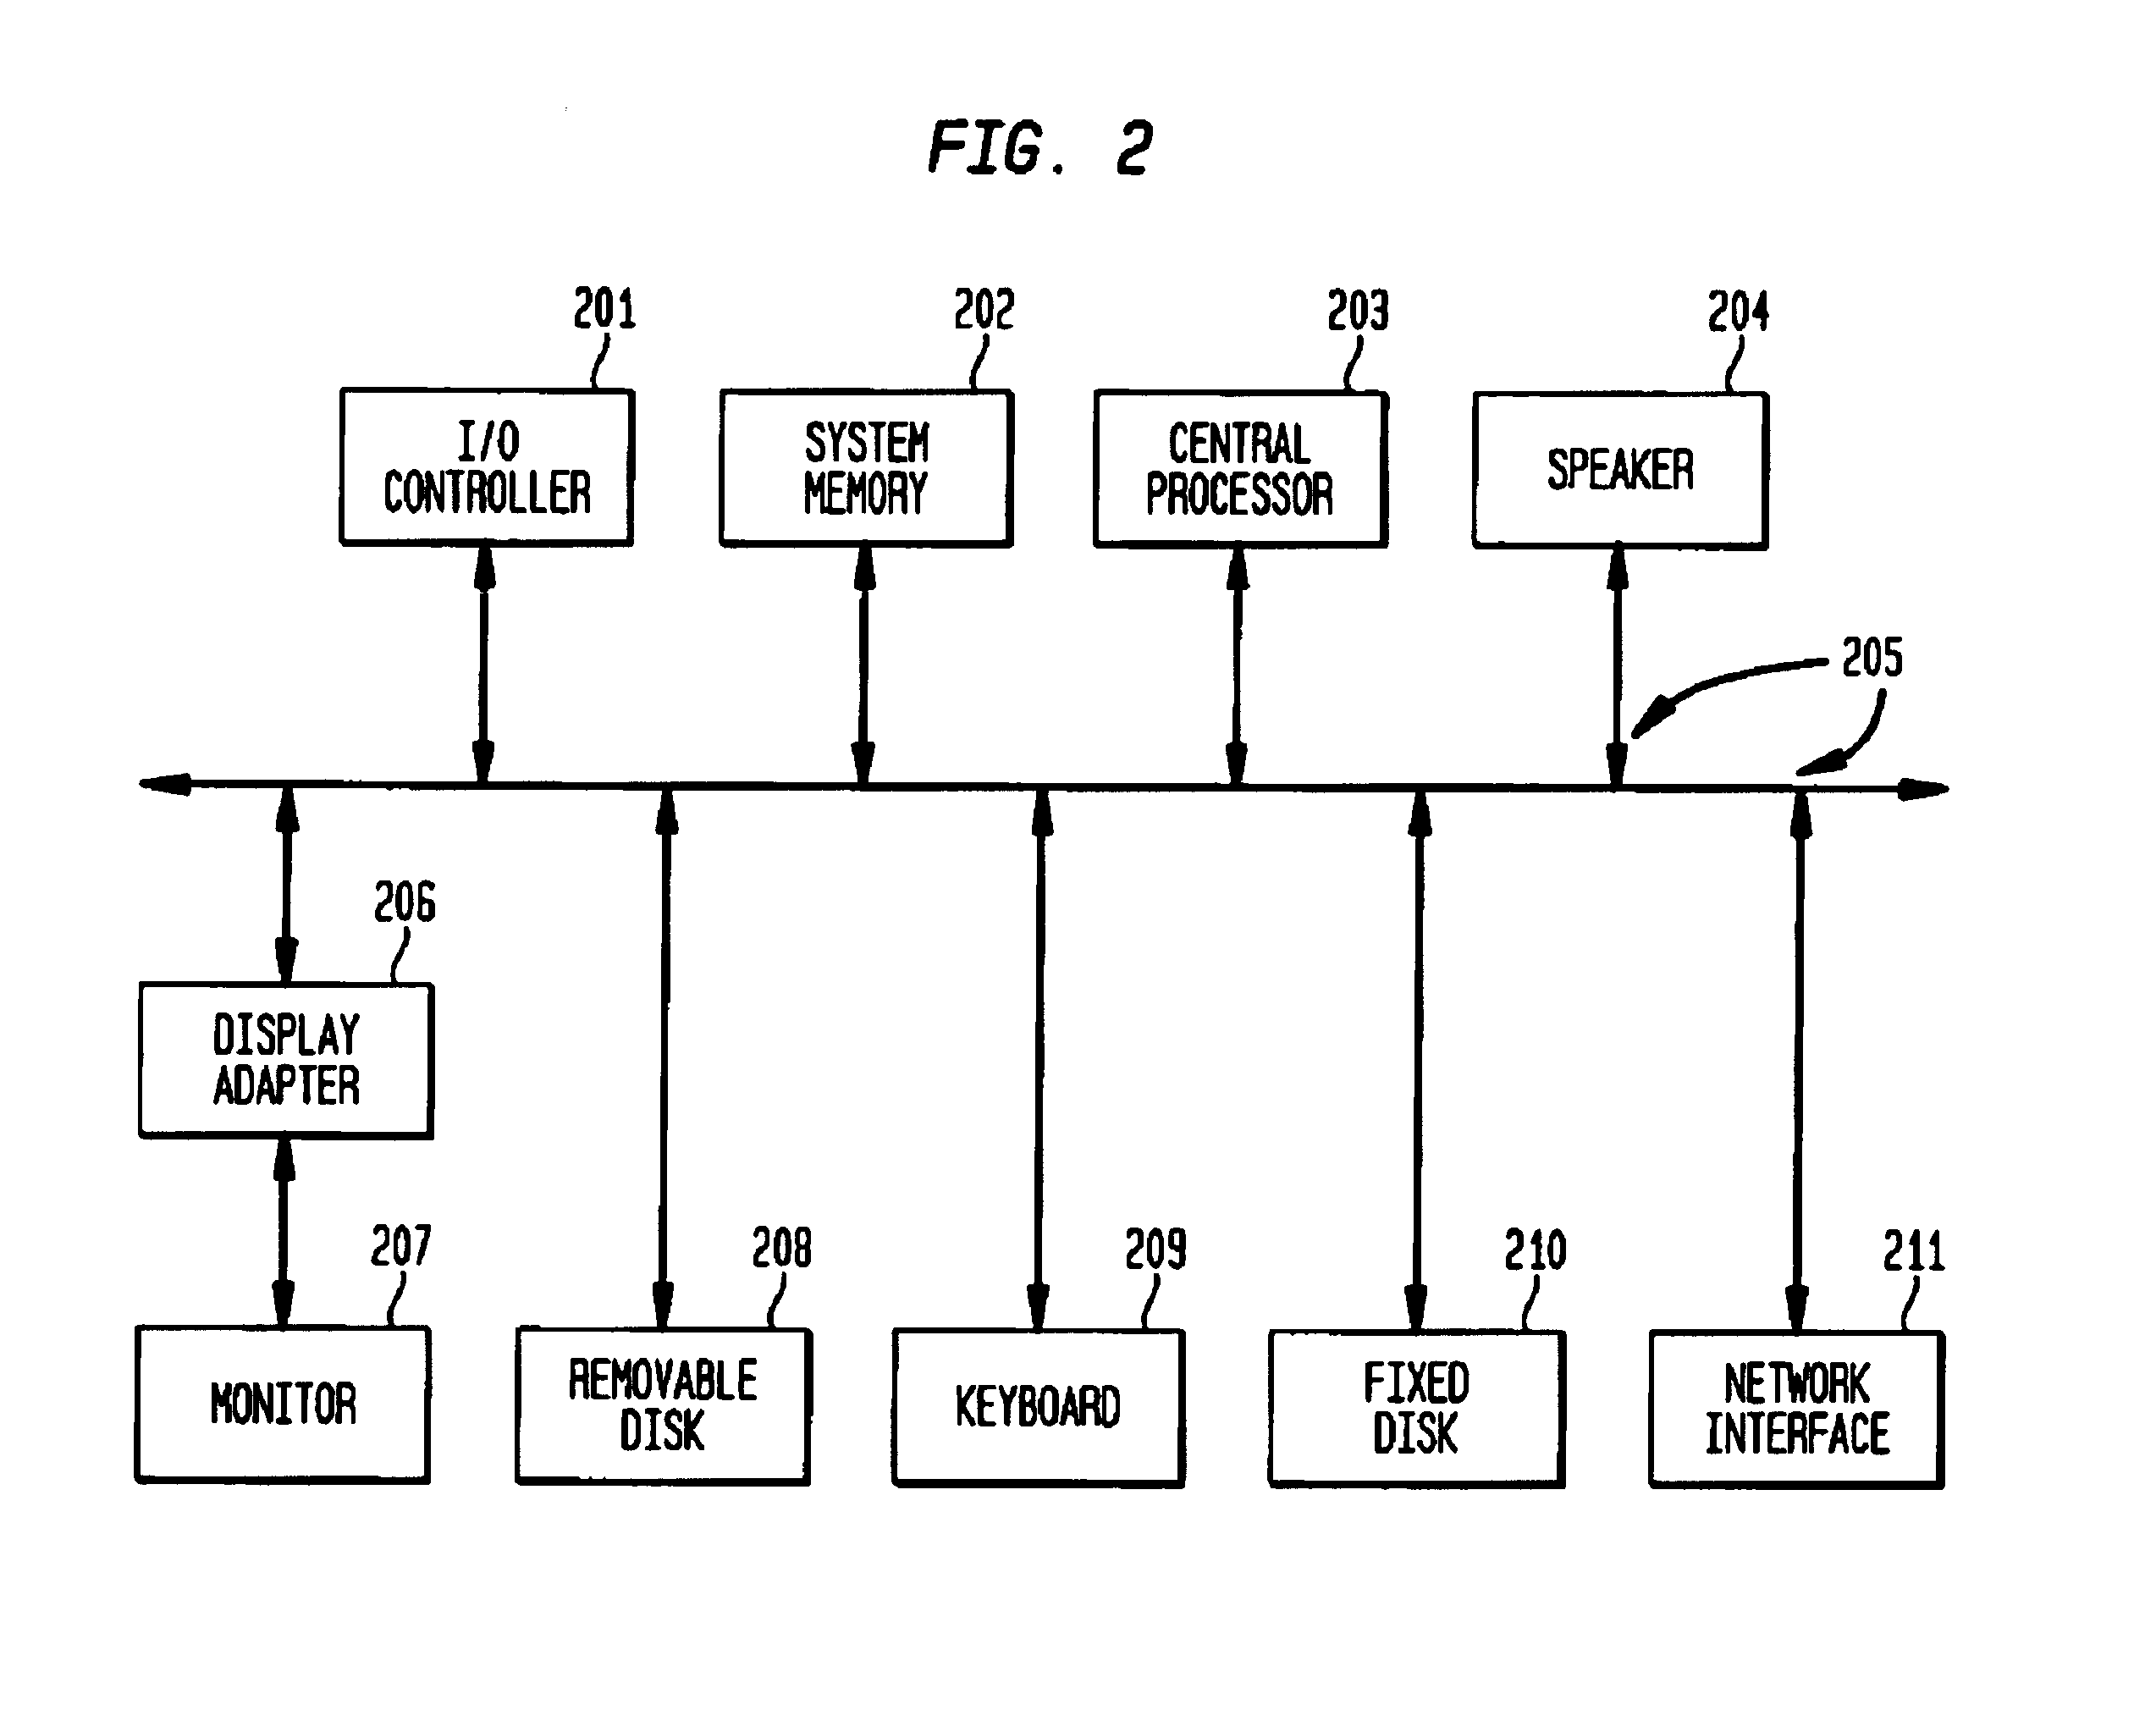 System, method, and computer software for genotyping analysis and identification of allelic imbalance